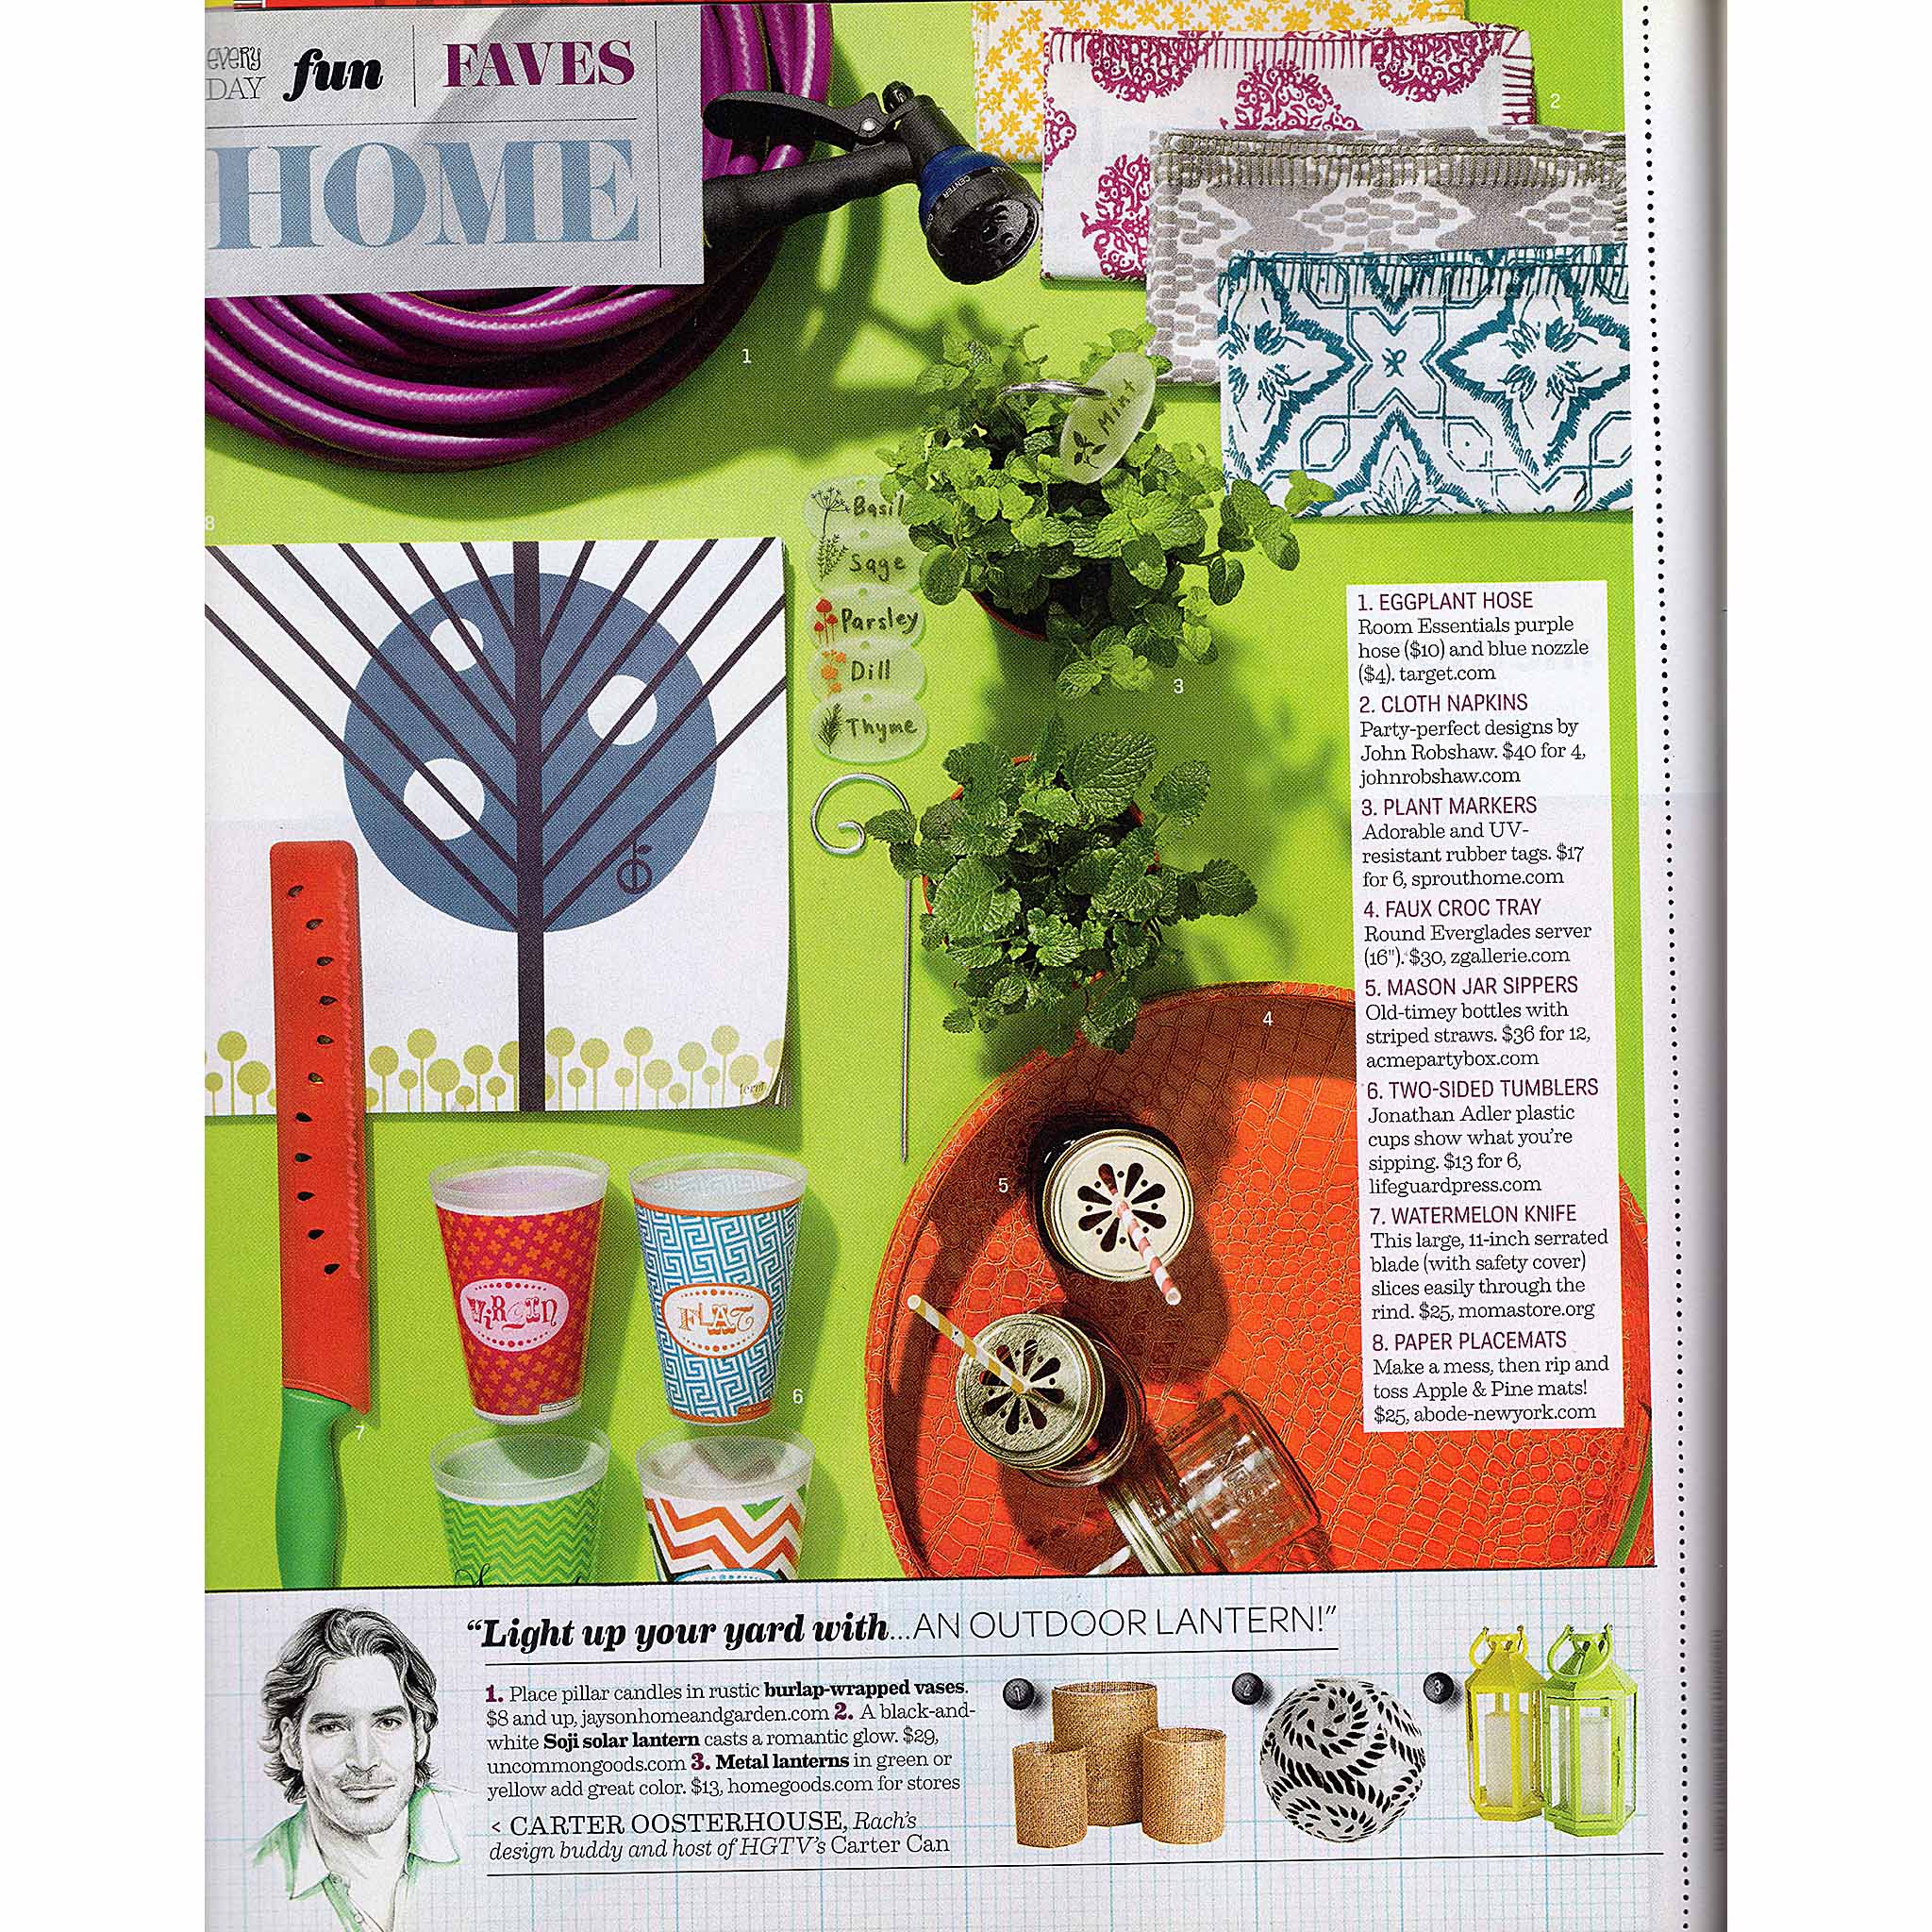 Every Day with Rachael Ray, "Every Day Fun - Faves / Home," Ferm Living Apple and Pine paper place mats, June/July 2011. 